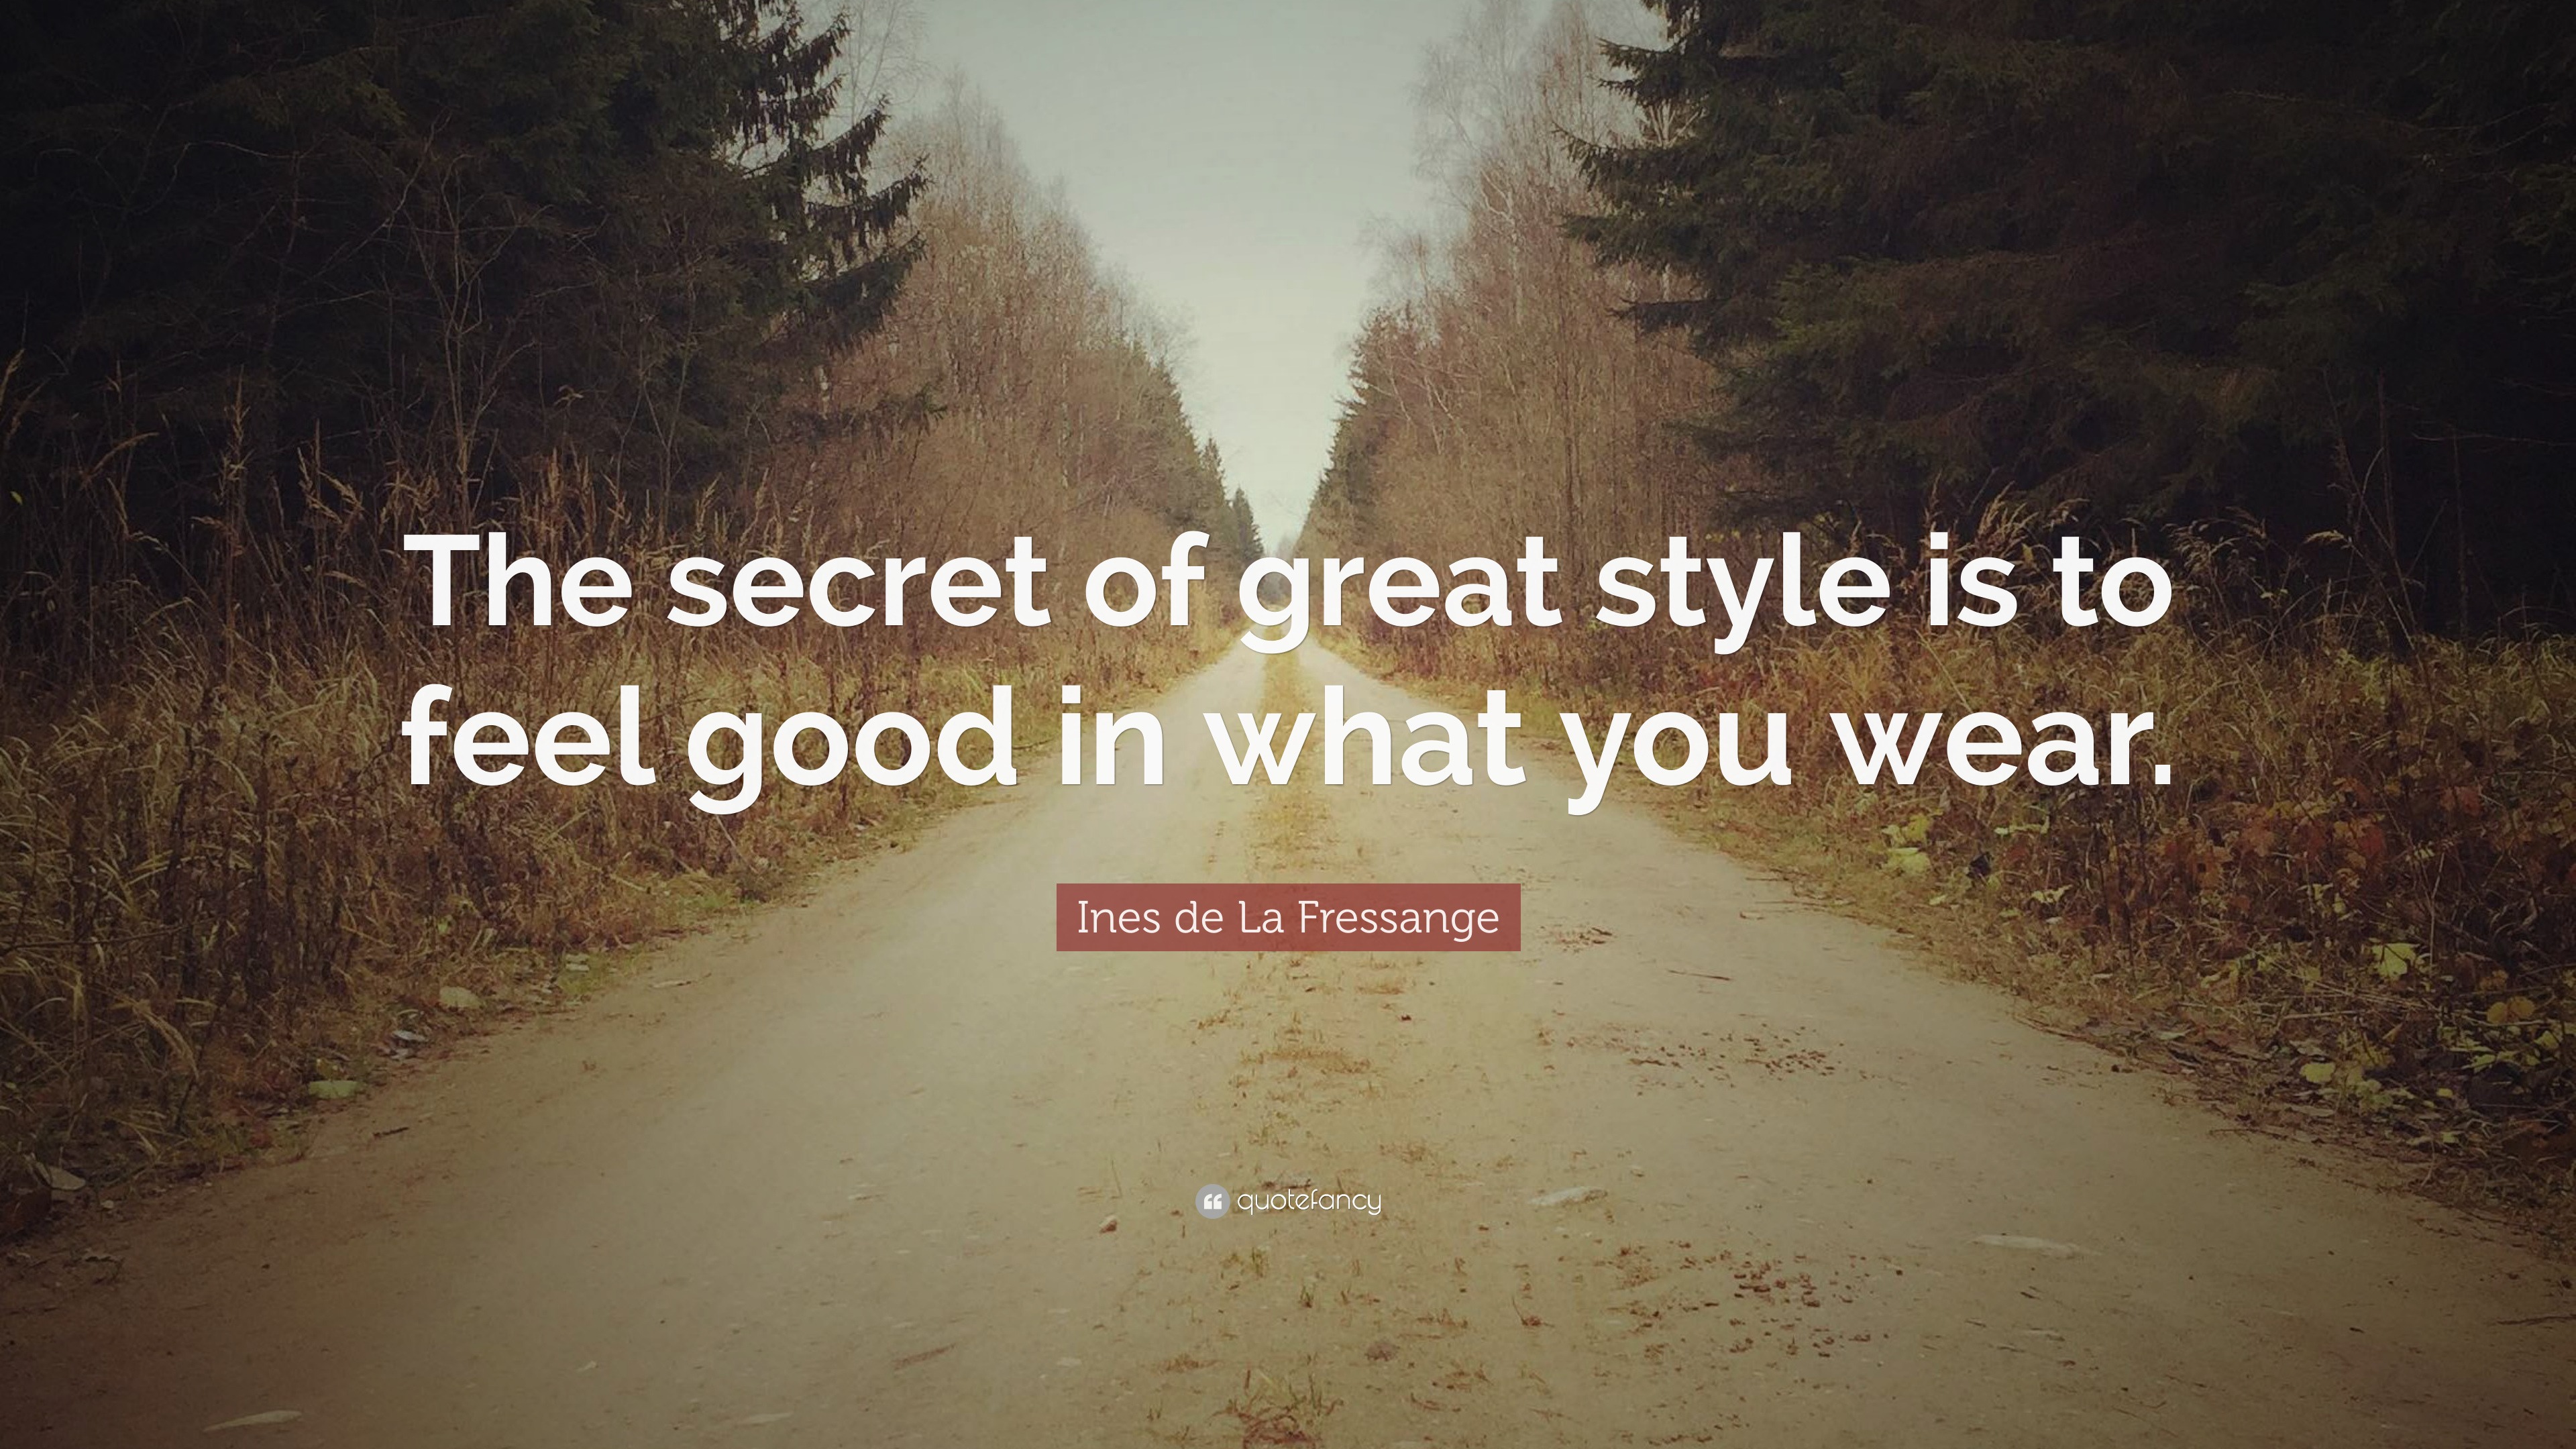 Suko Jeans - The secret to great style is feeling good in what you